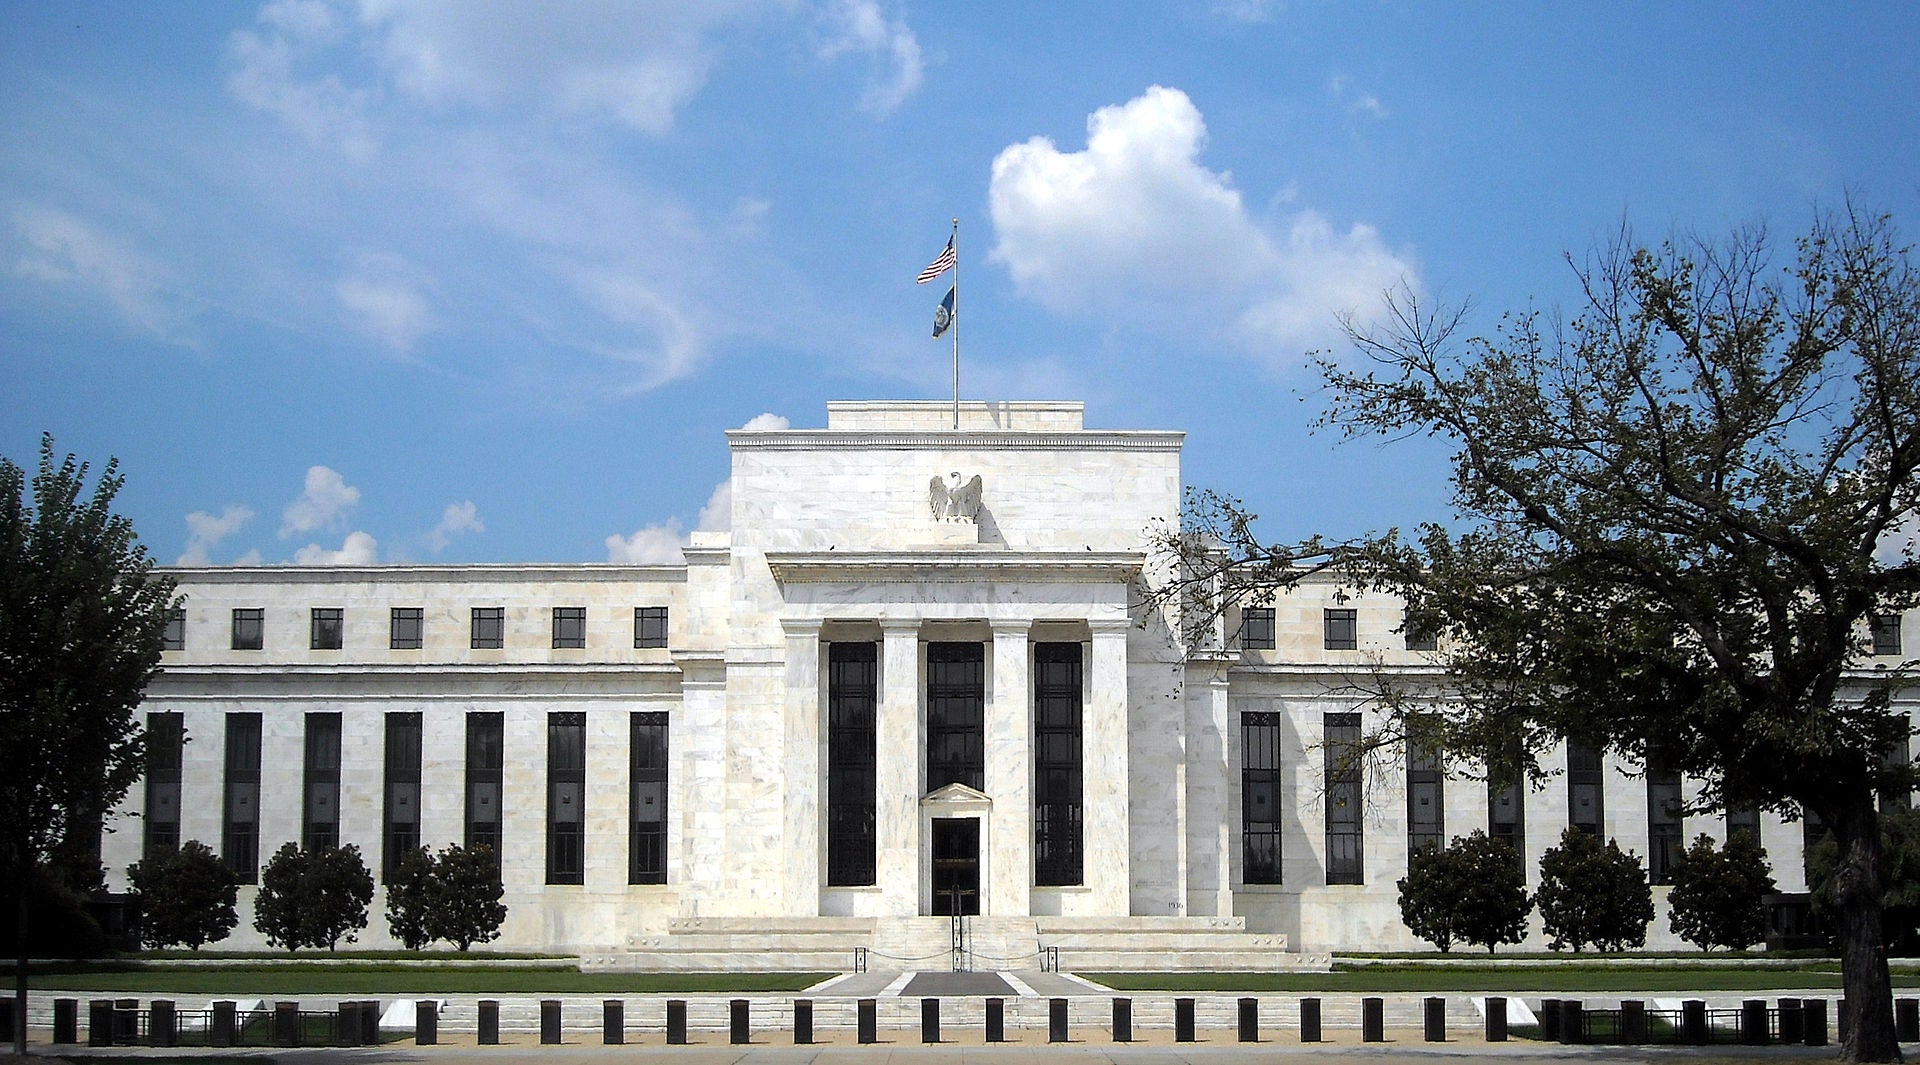 Federal Reserve to launch FedNow real-time payments service in mid-2023